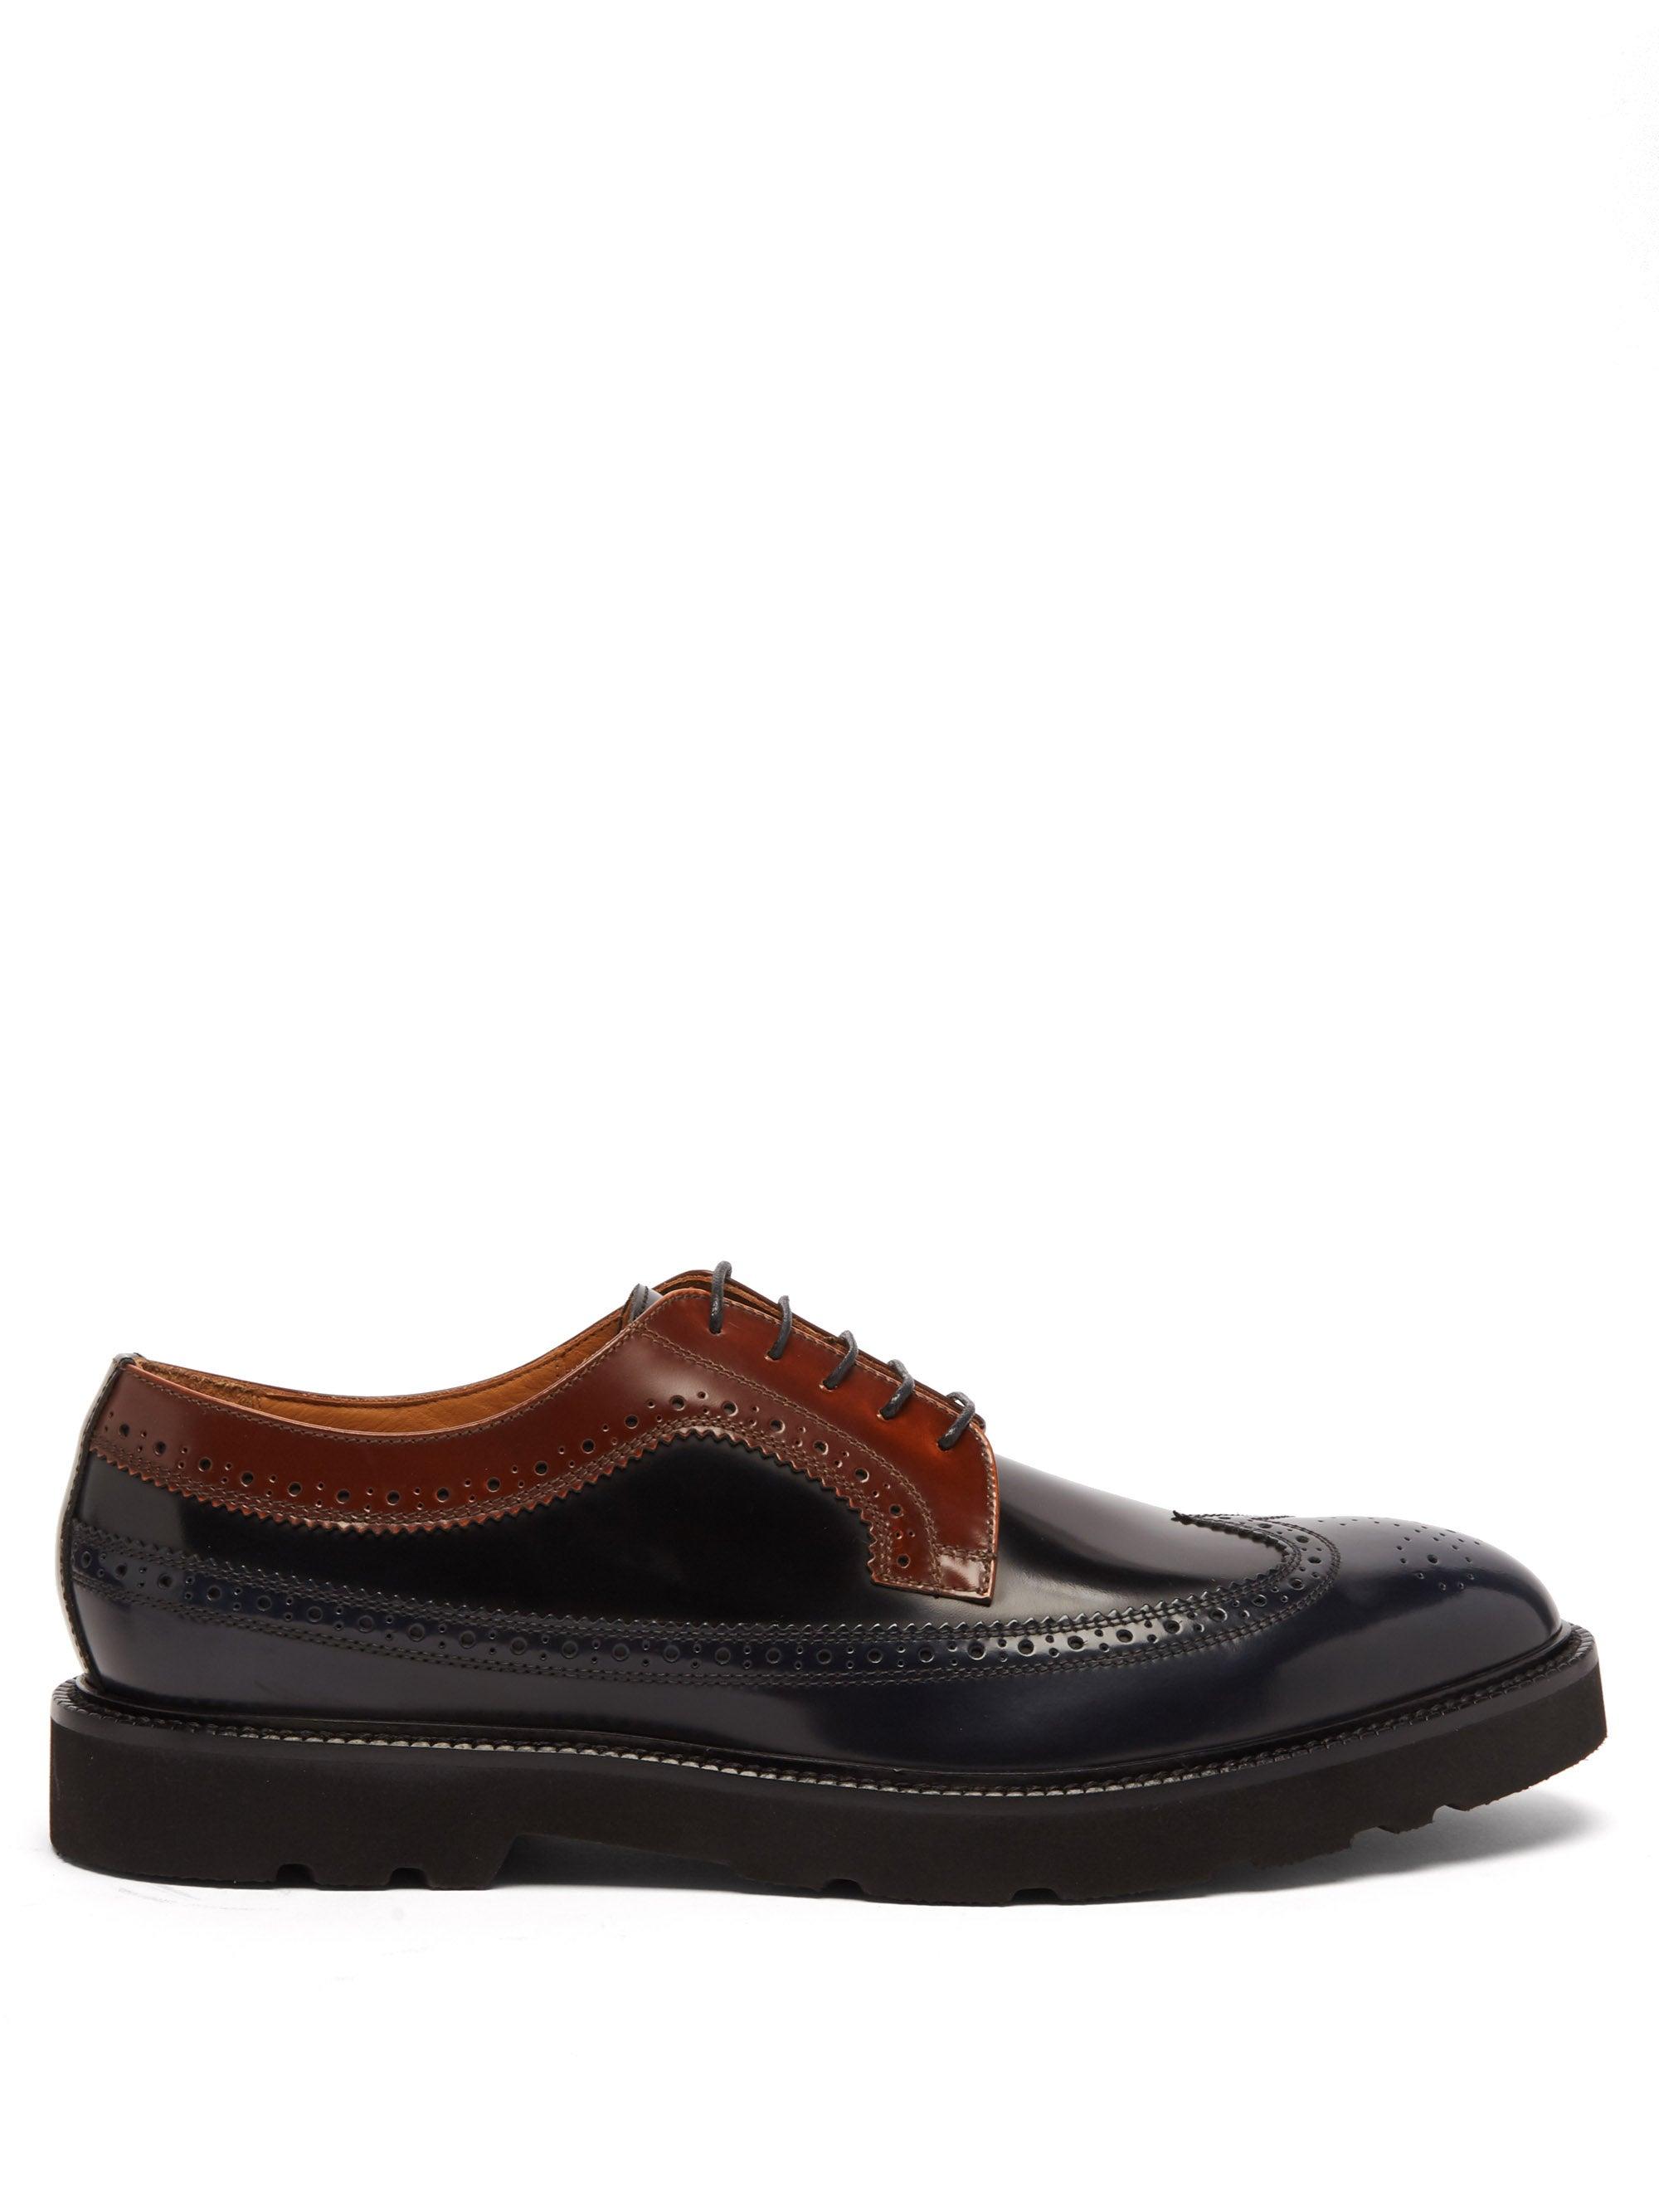 Paul Smith Count Leather Brogues in Dark Navy (Blue) for Men | Lyst